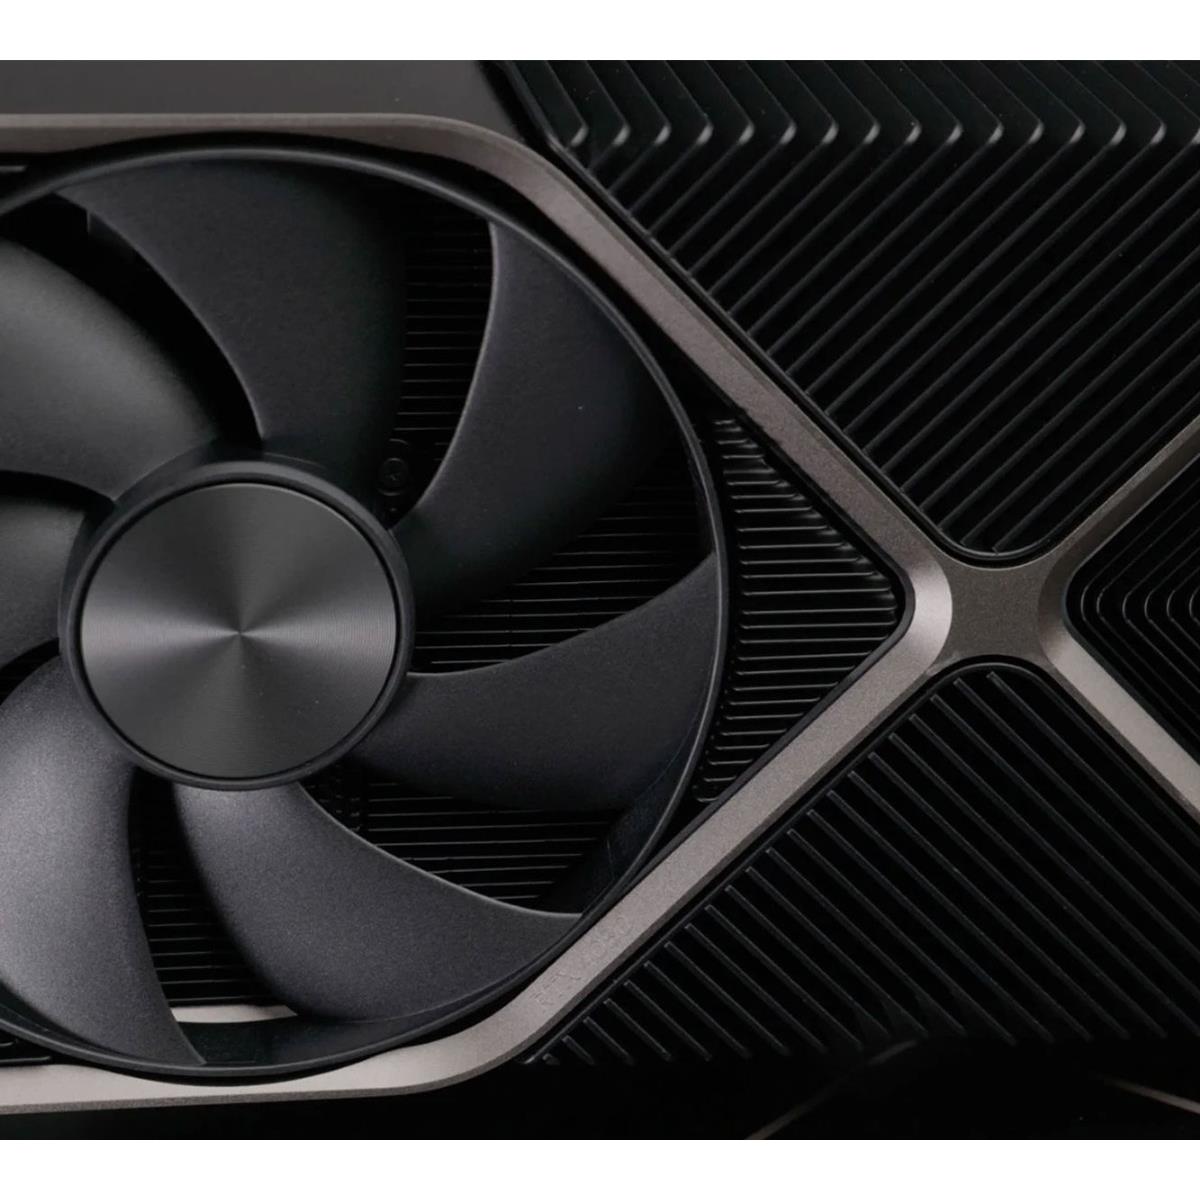 Nvidia GeForce RTX 4080 Rumored to Get Mid-December Price Cut